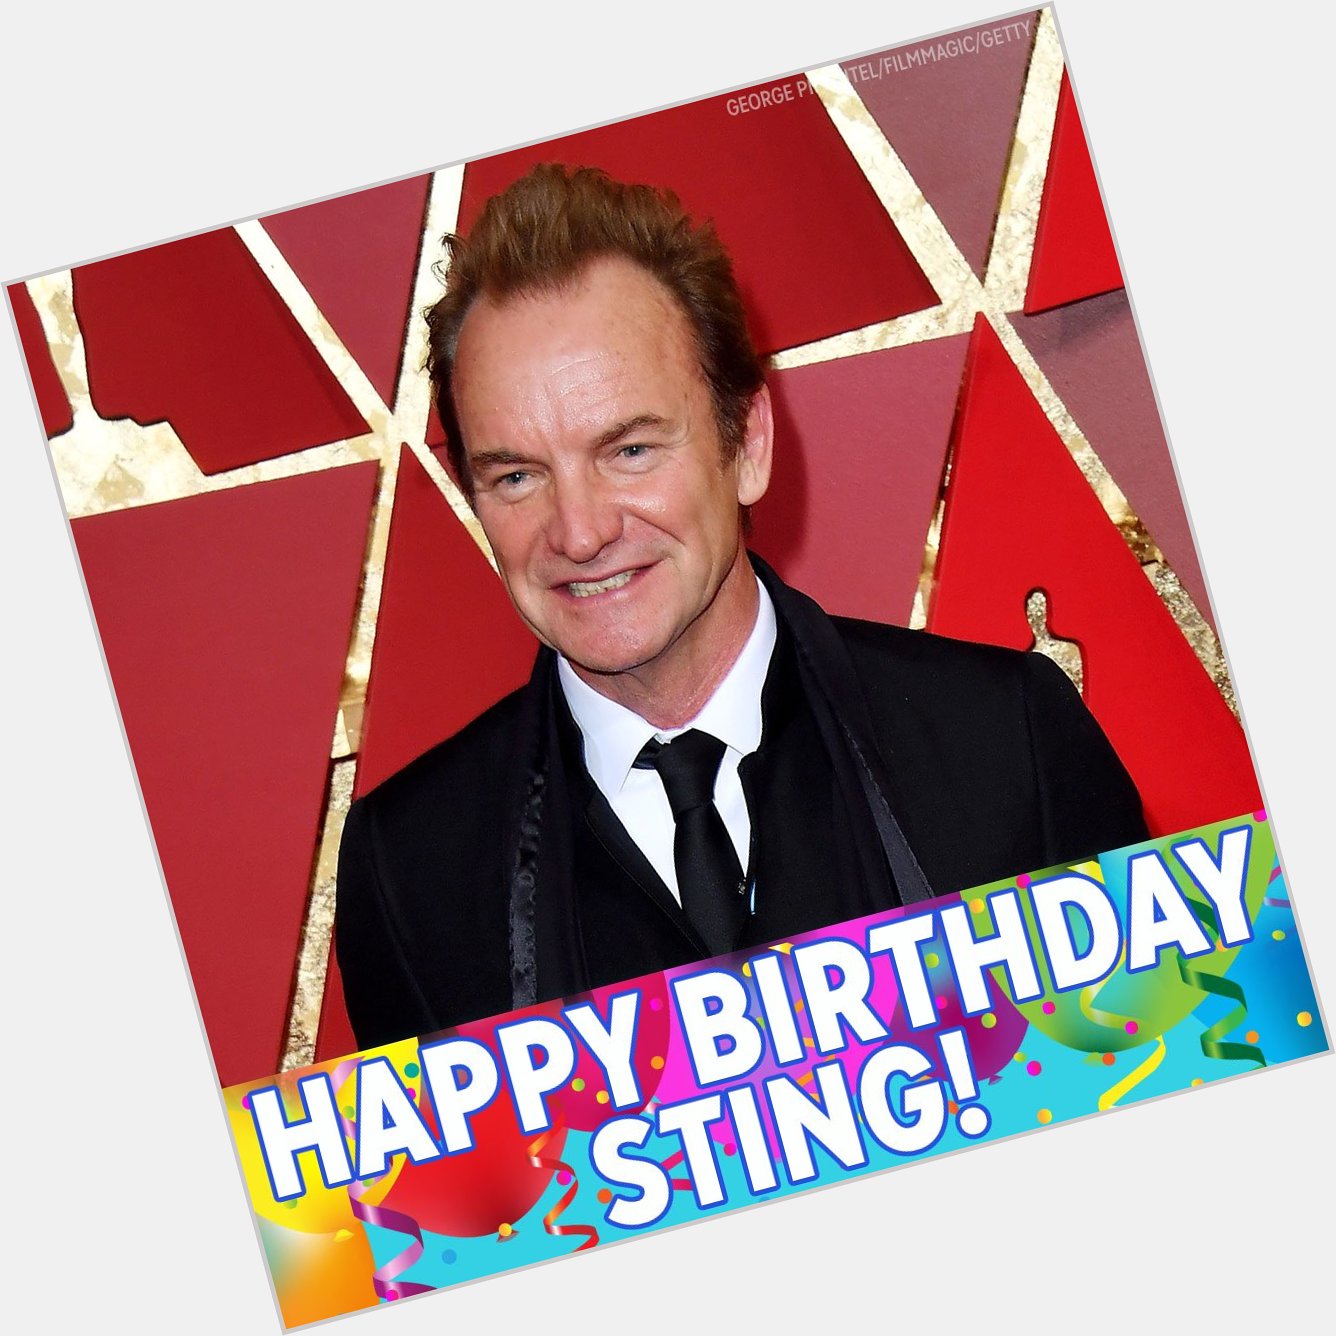 May the world continue to be wrapped around your finger! Happy Birthday Sting! 